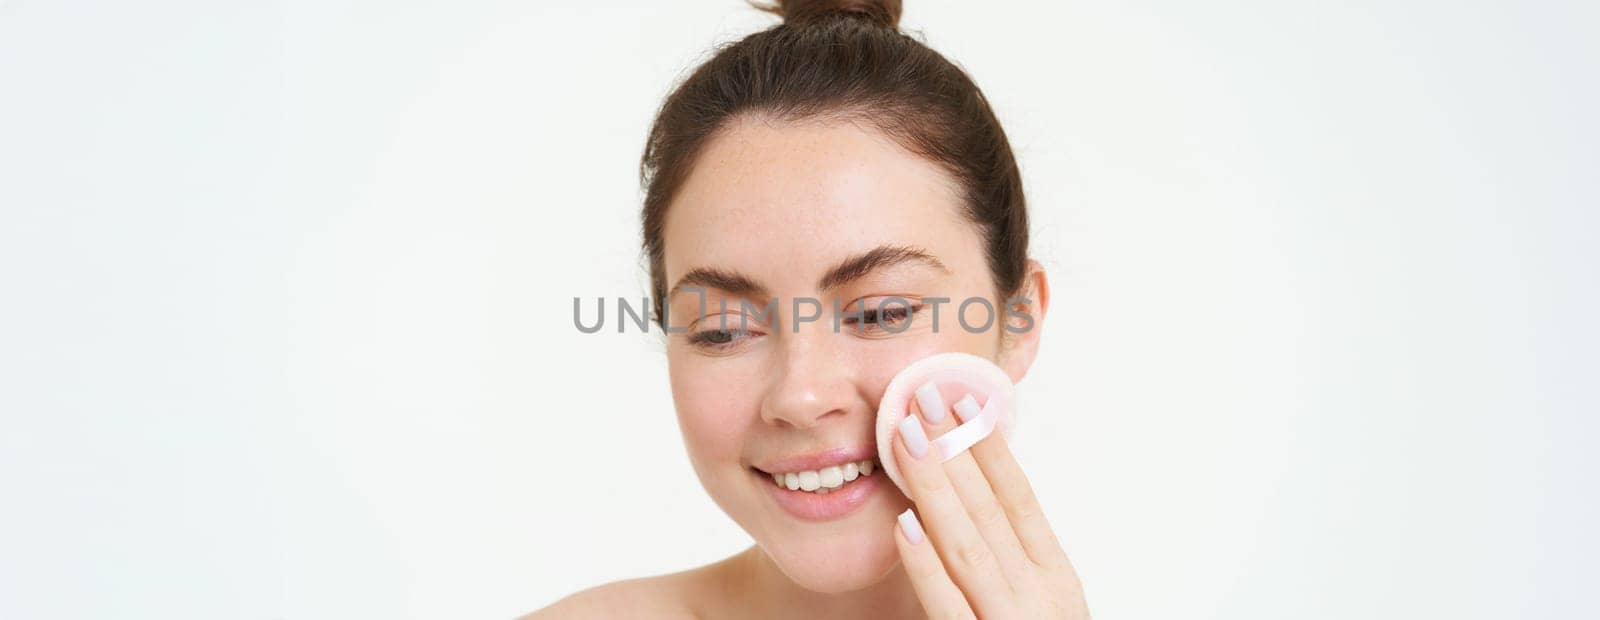 Portrait of young woman cleansing her face, takes off her makeup, washing her face, using skincare routine with cotton pads, isolated over white background.